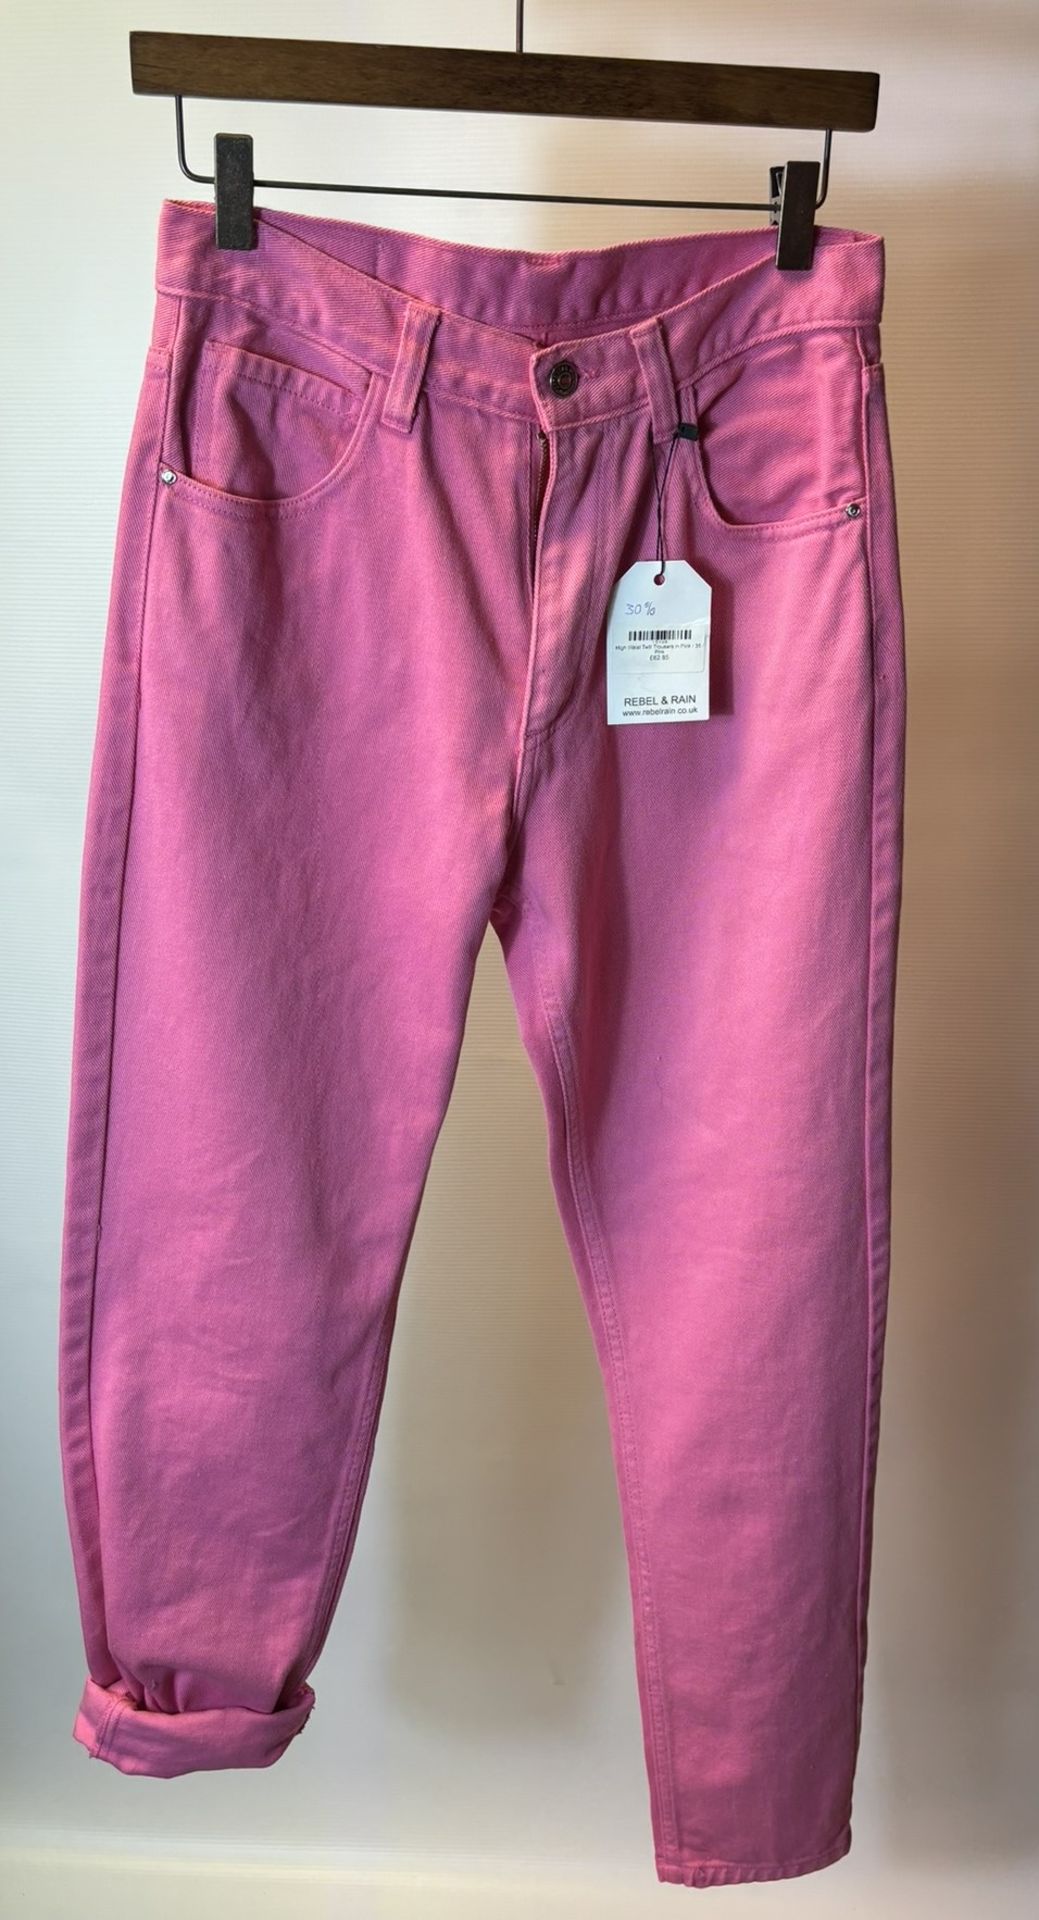 12 x Various Pairs Of Women's Trousers/Jeans As Seen In Photos - Image 16 of 36